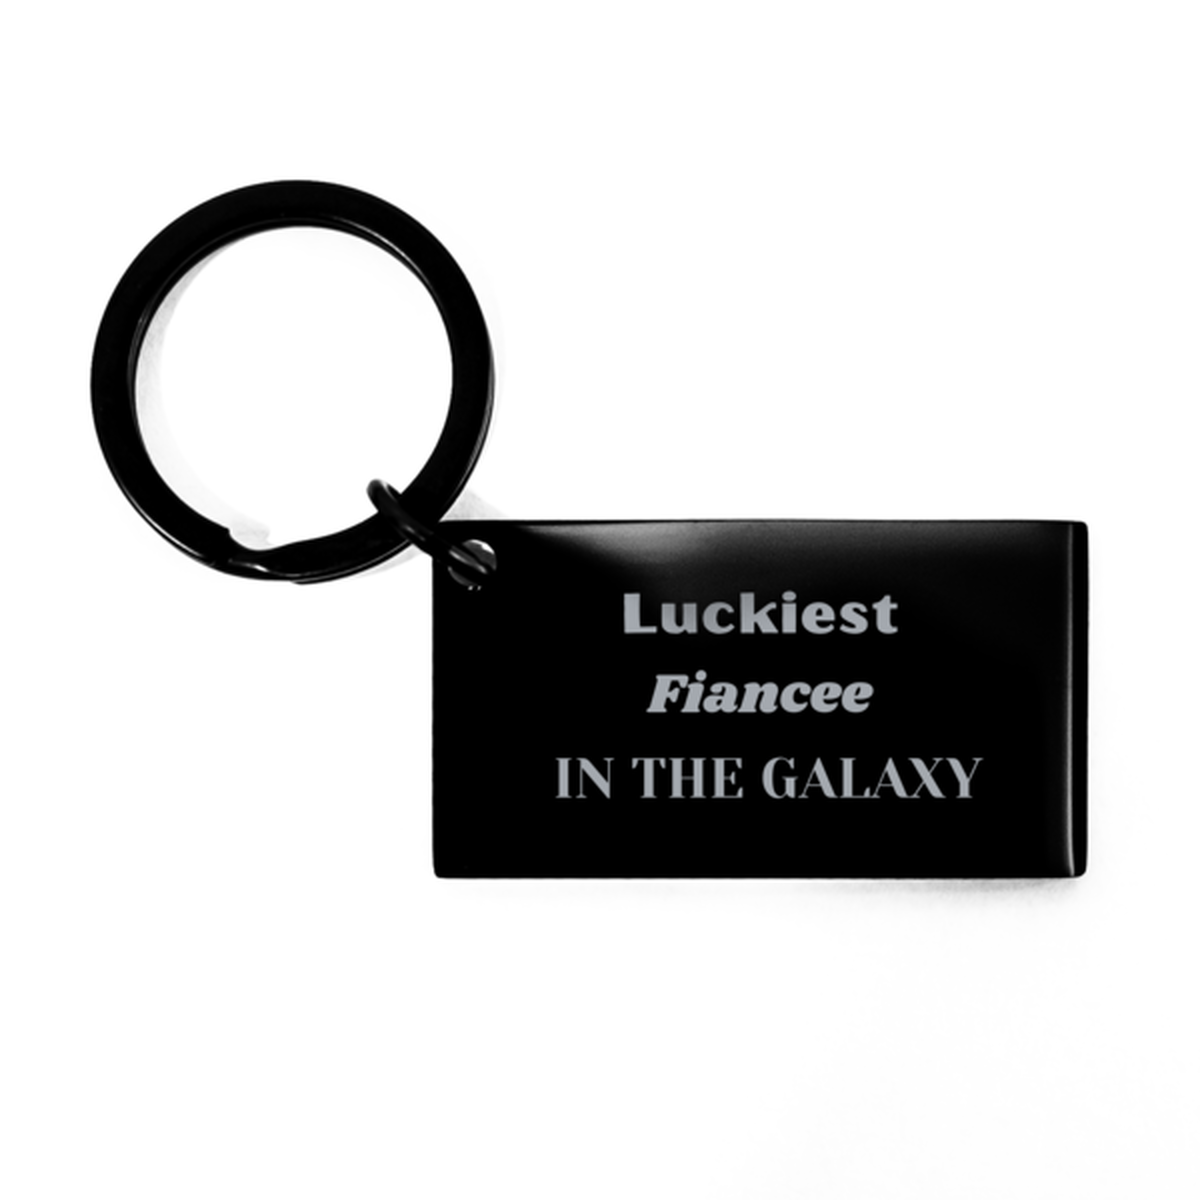 Luckiest Fiancee in the Galaxy, To My Fiancee Engraved Gifts, Christmas Fiancee Keychain Gifts, X-mas Birthday Unique Gifts For Fiancee Men Women